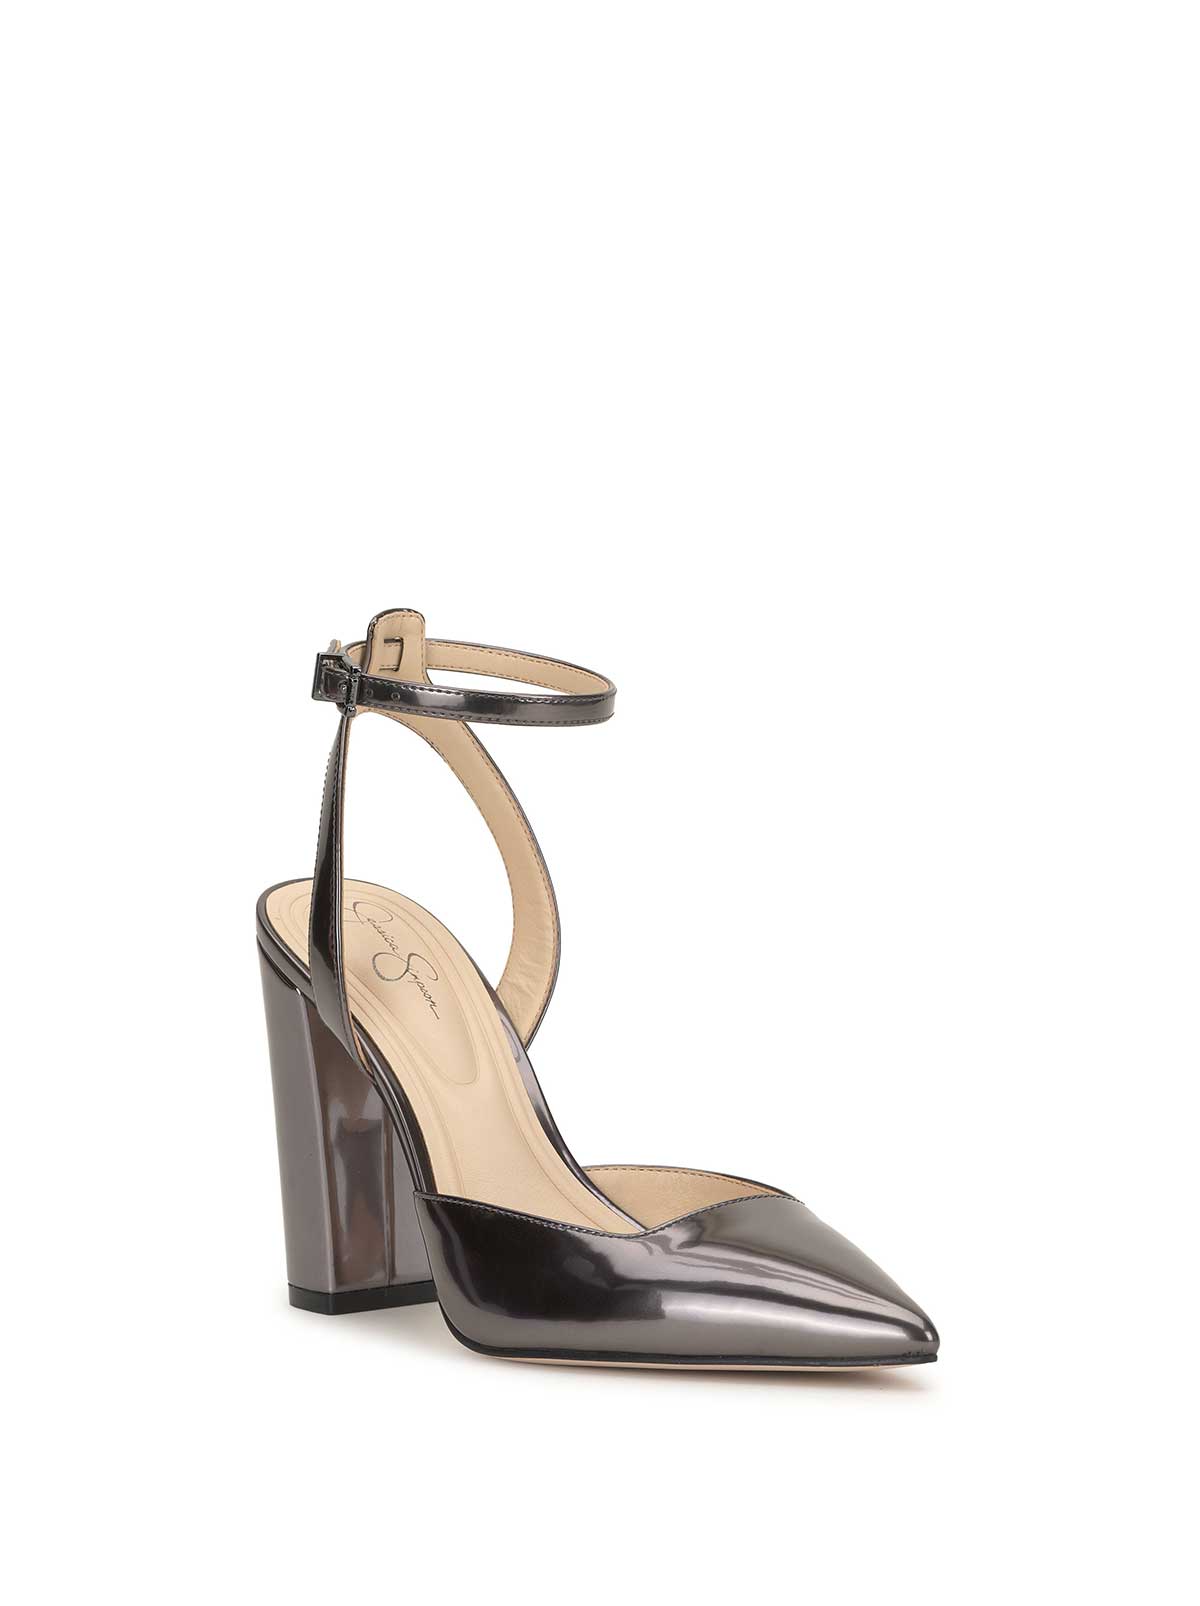 Nazela Pump in Pewter – Jessica Simpson